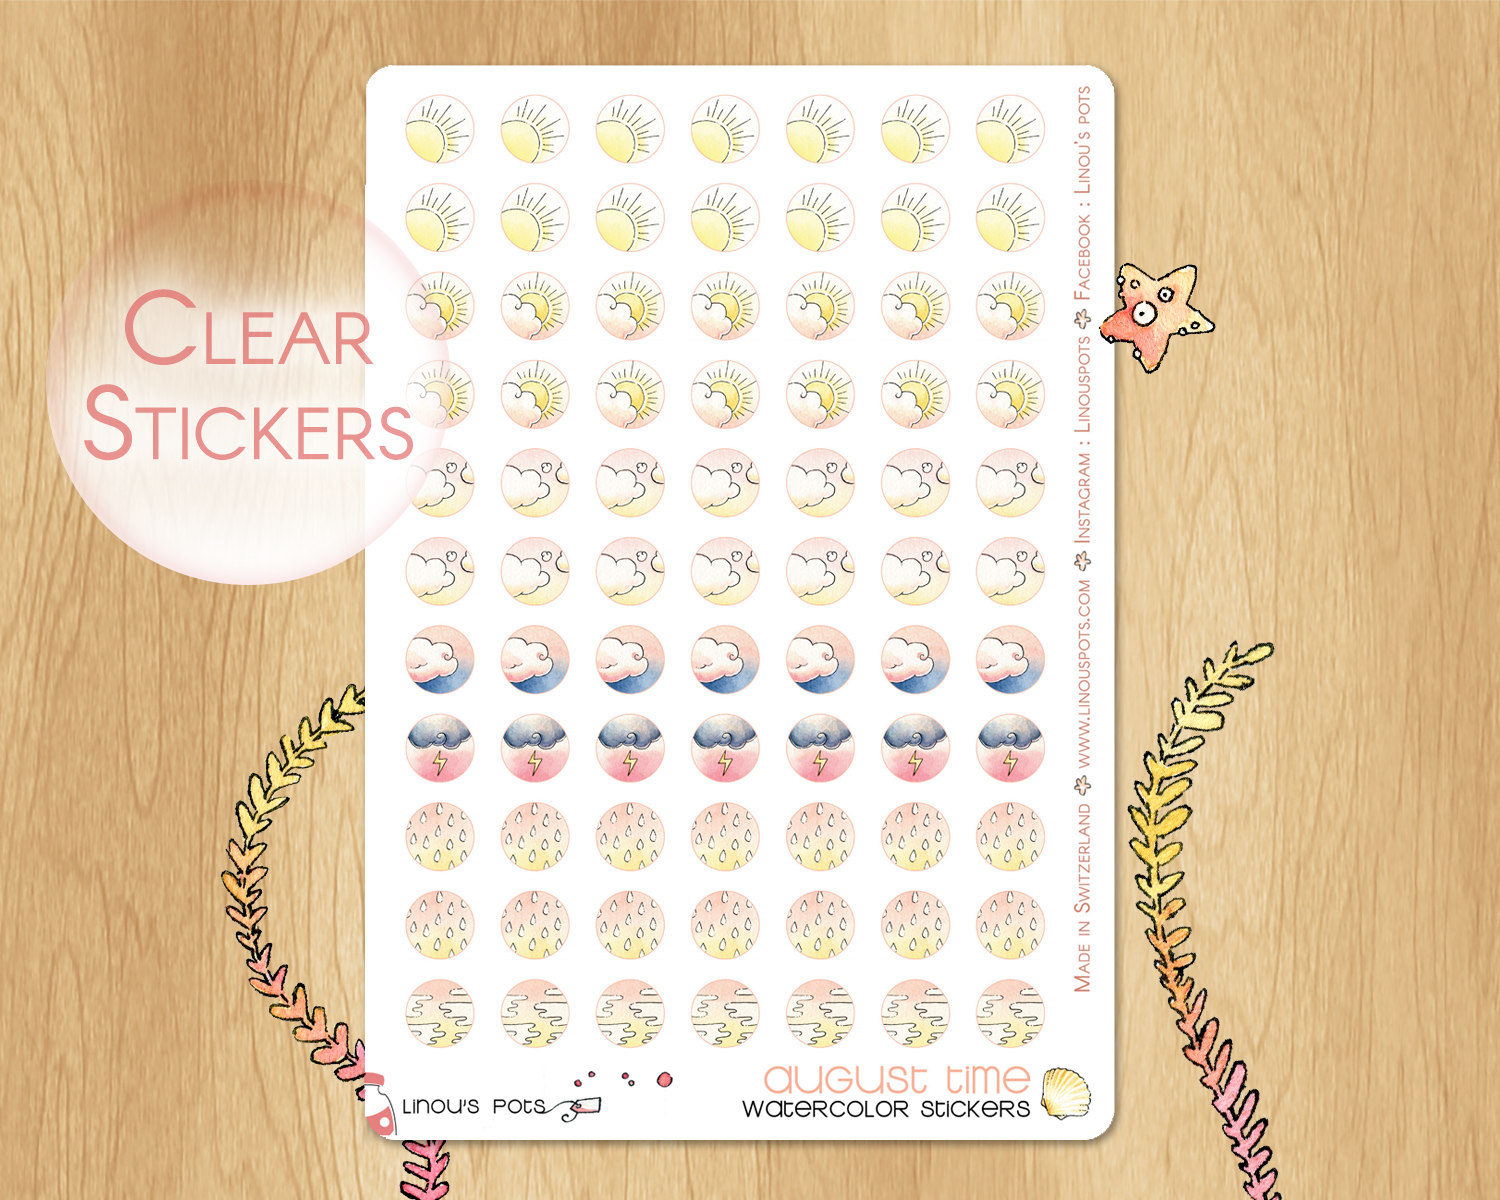 Weather watercolor stickers in pink and yellow tones